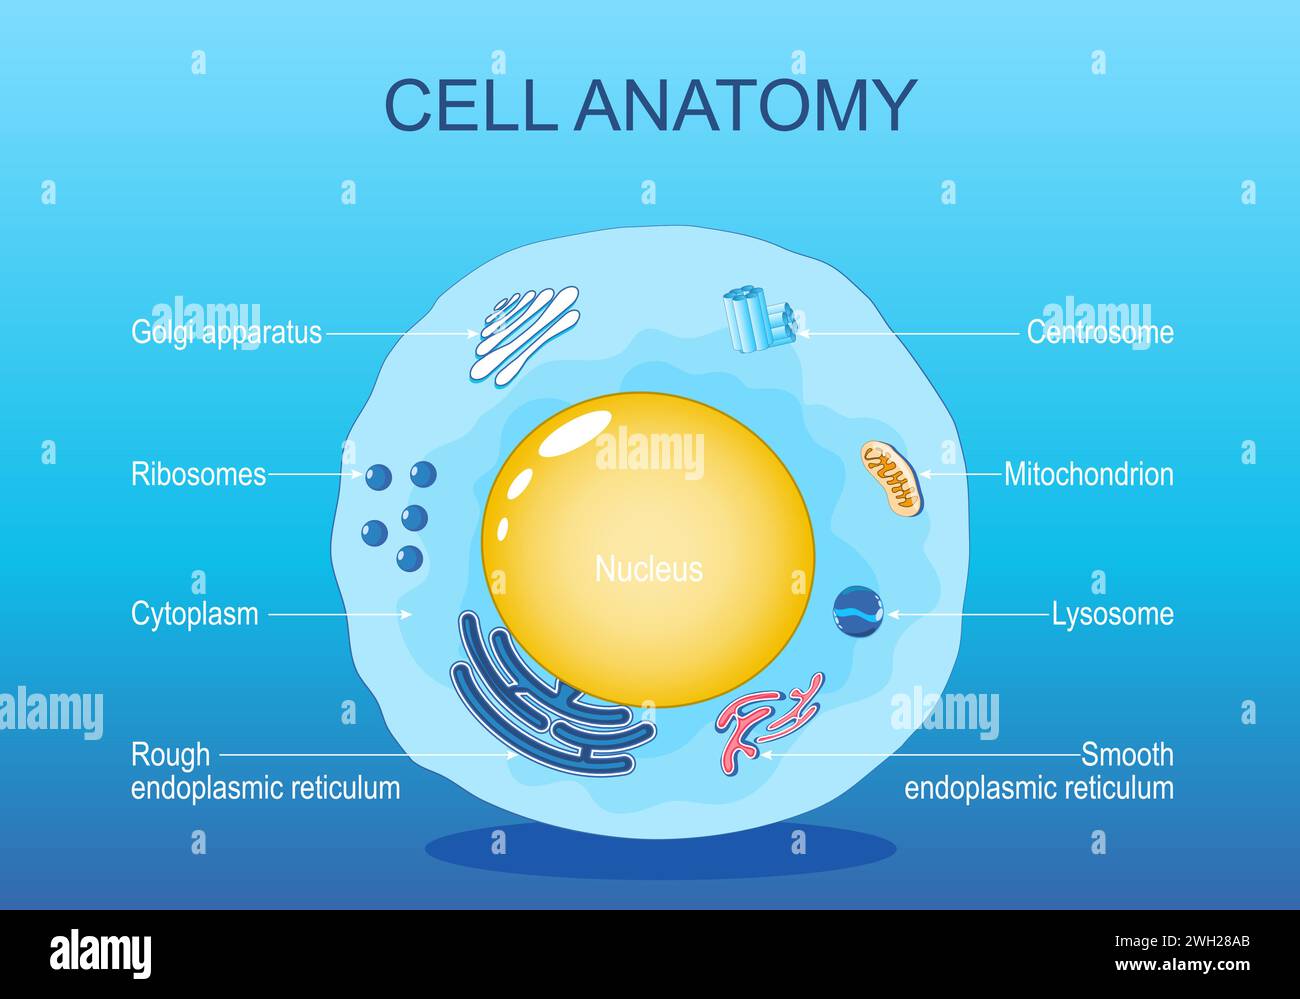 Anatomy of animal cell. Human cell structure. All organelles: Nucleus, Ribosome, Rough endoplasmic reticulum, Golgi apparatus, mitochondrion, cytoplas Stock Vector